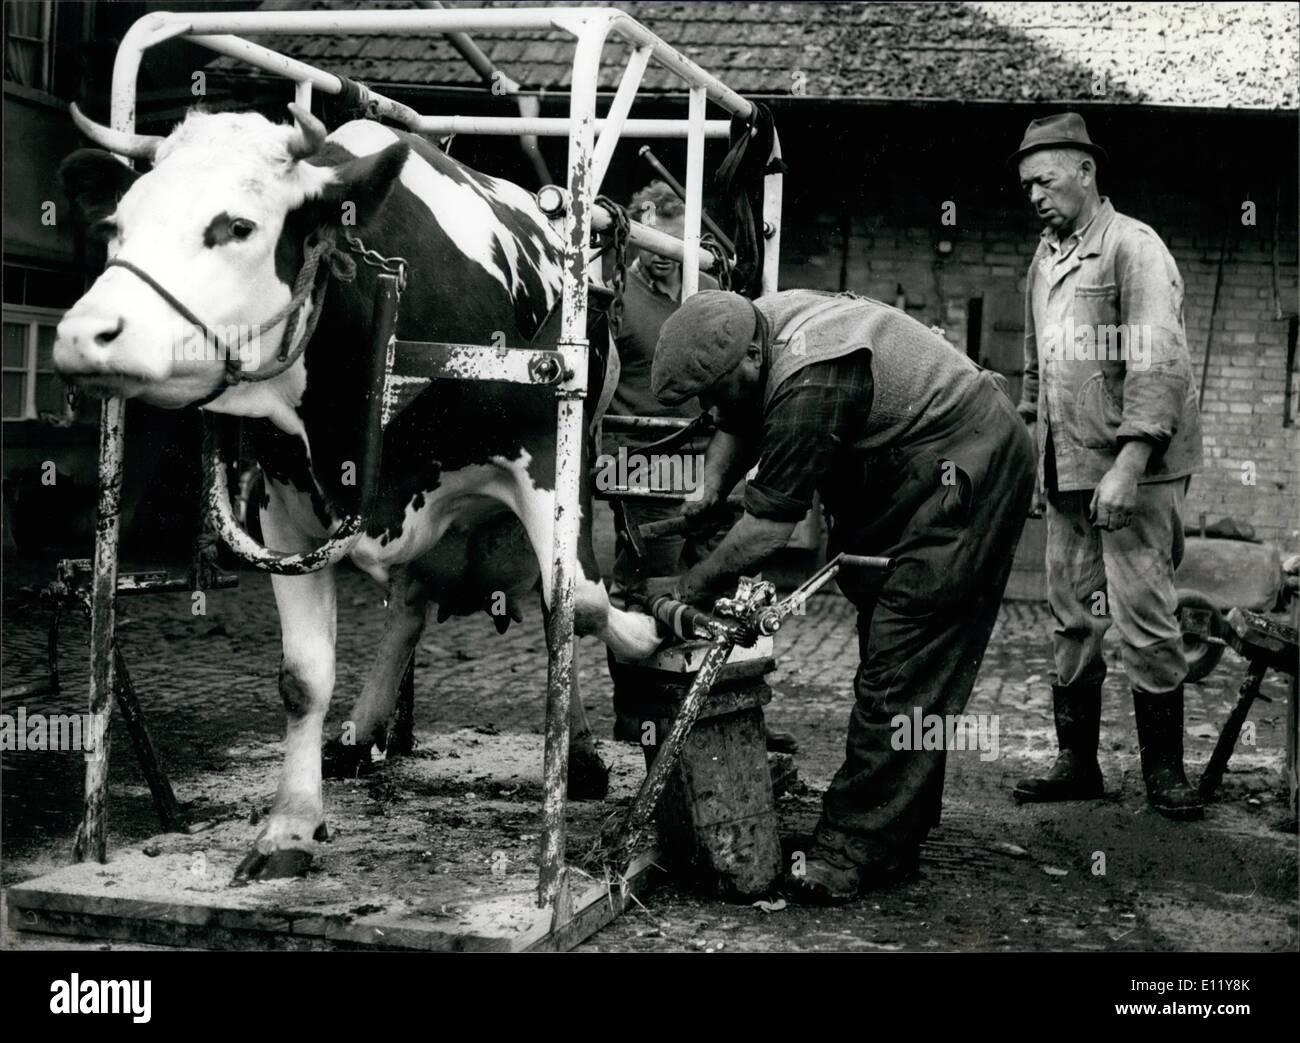 Dec. 12, 1980 - cattle-pedicure: No problem to cut your nails -but did you ever try with a cow. Alfred Gutknecht is one of the specialists cleaning the cattles hoofs which isn't as simple as you might think. First you have to get the cow in this stand and even then the animals are moving quite angrily. Picture was taken in Kerzeers near Berne these days. Stock Photo